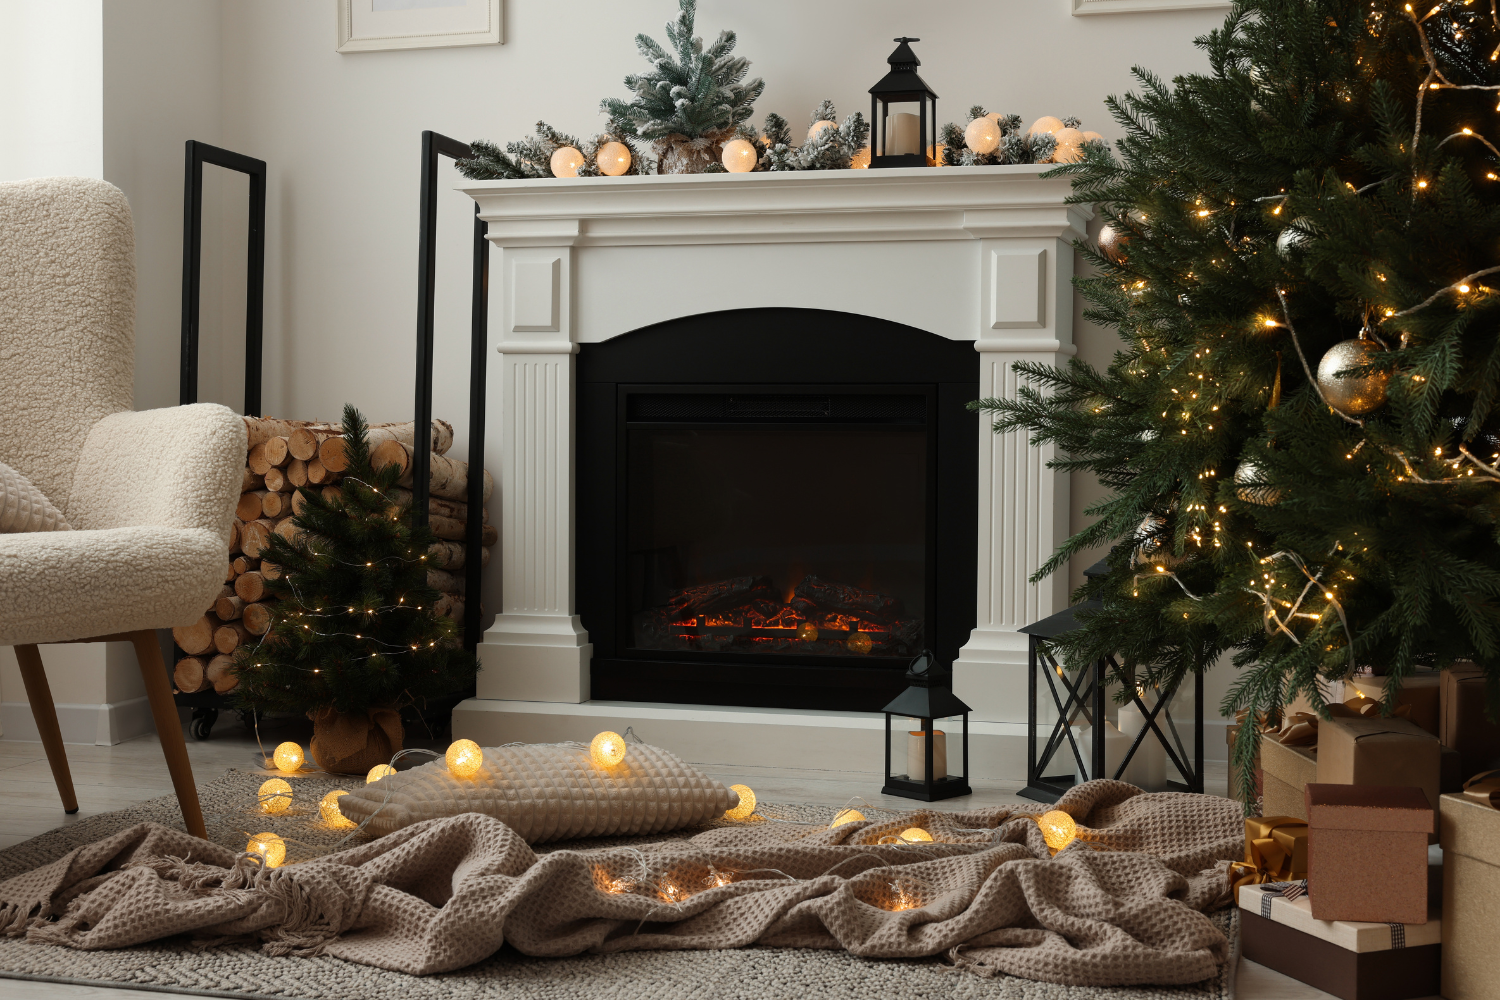 Add Festive Charm to Your Home With These Holiday Decorating Tips